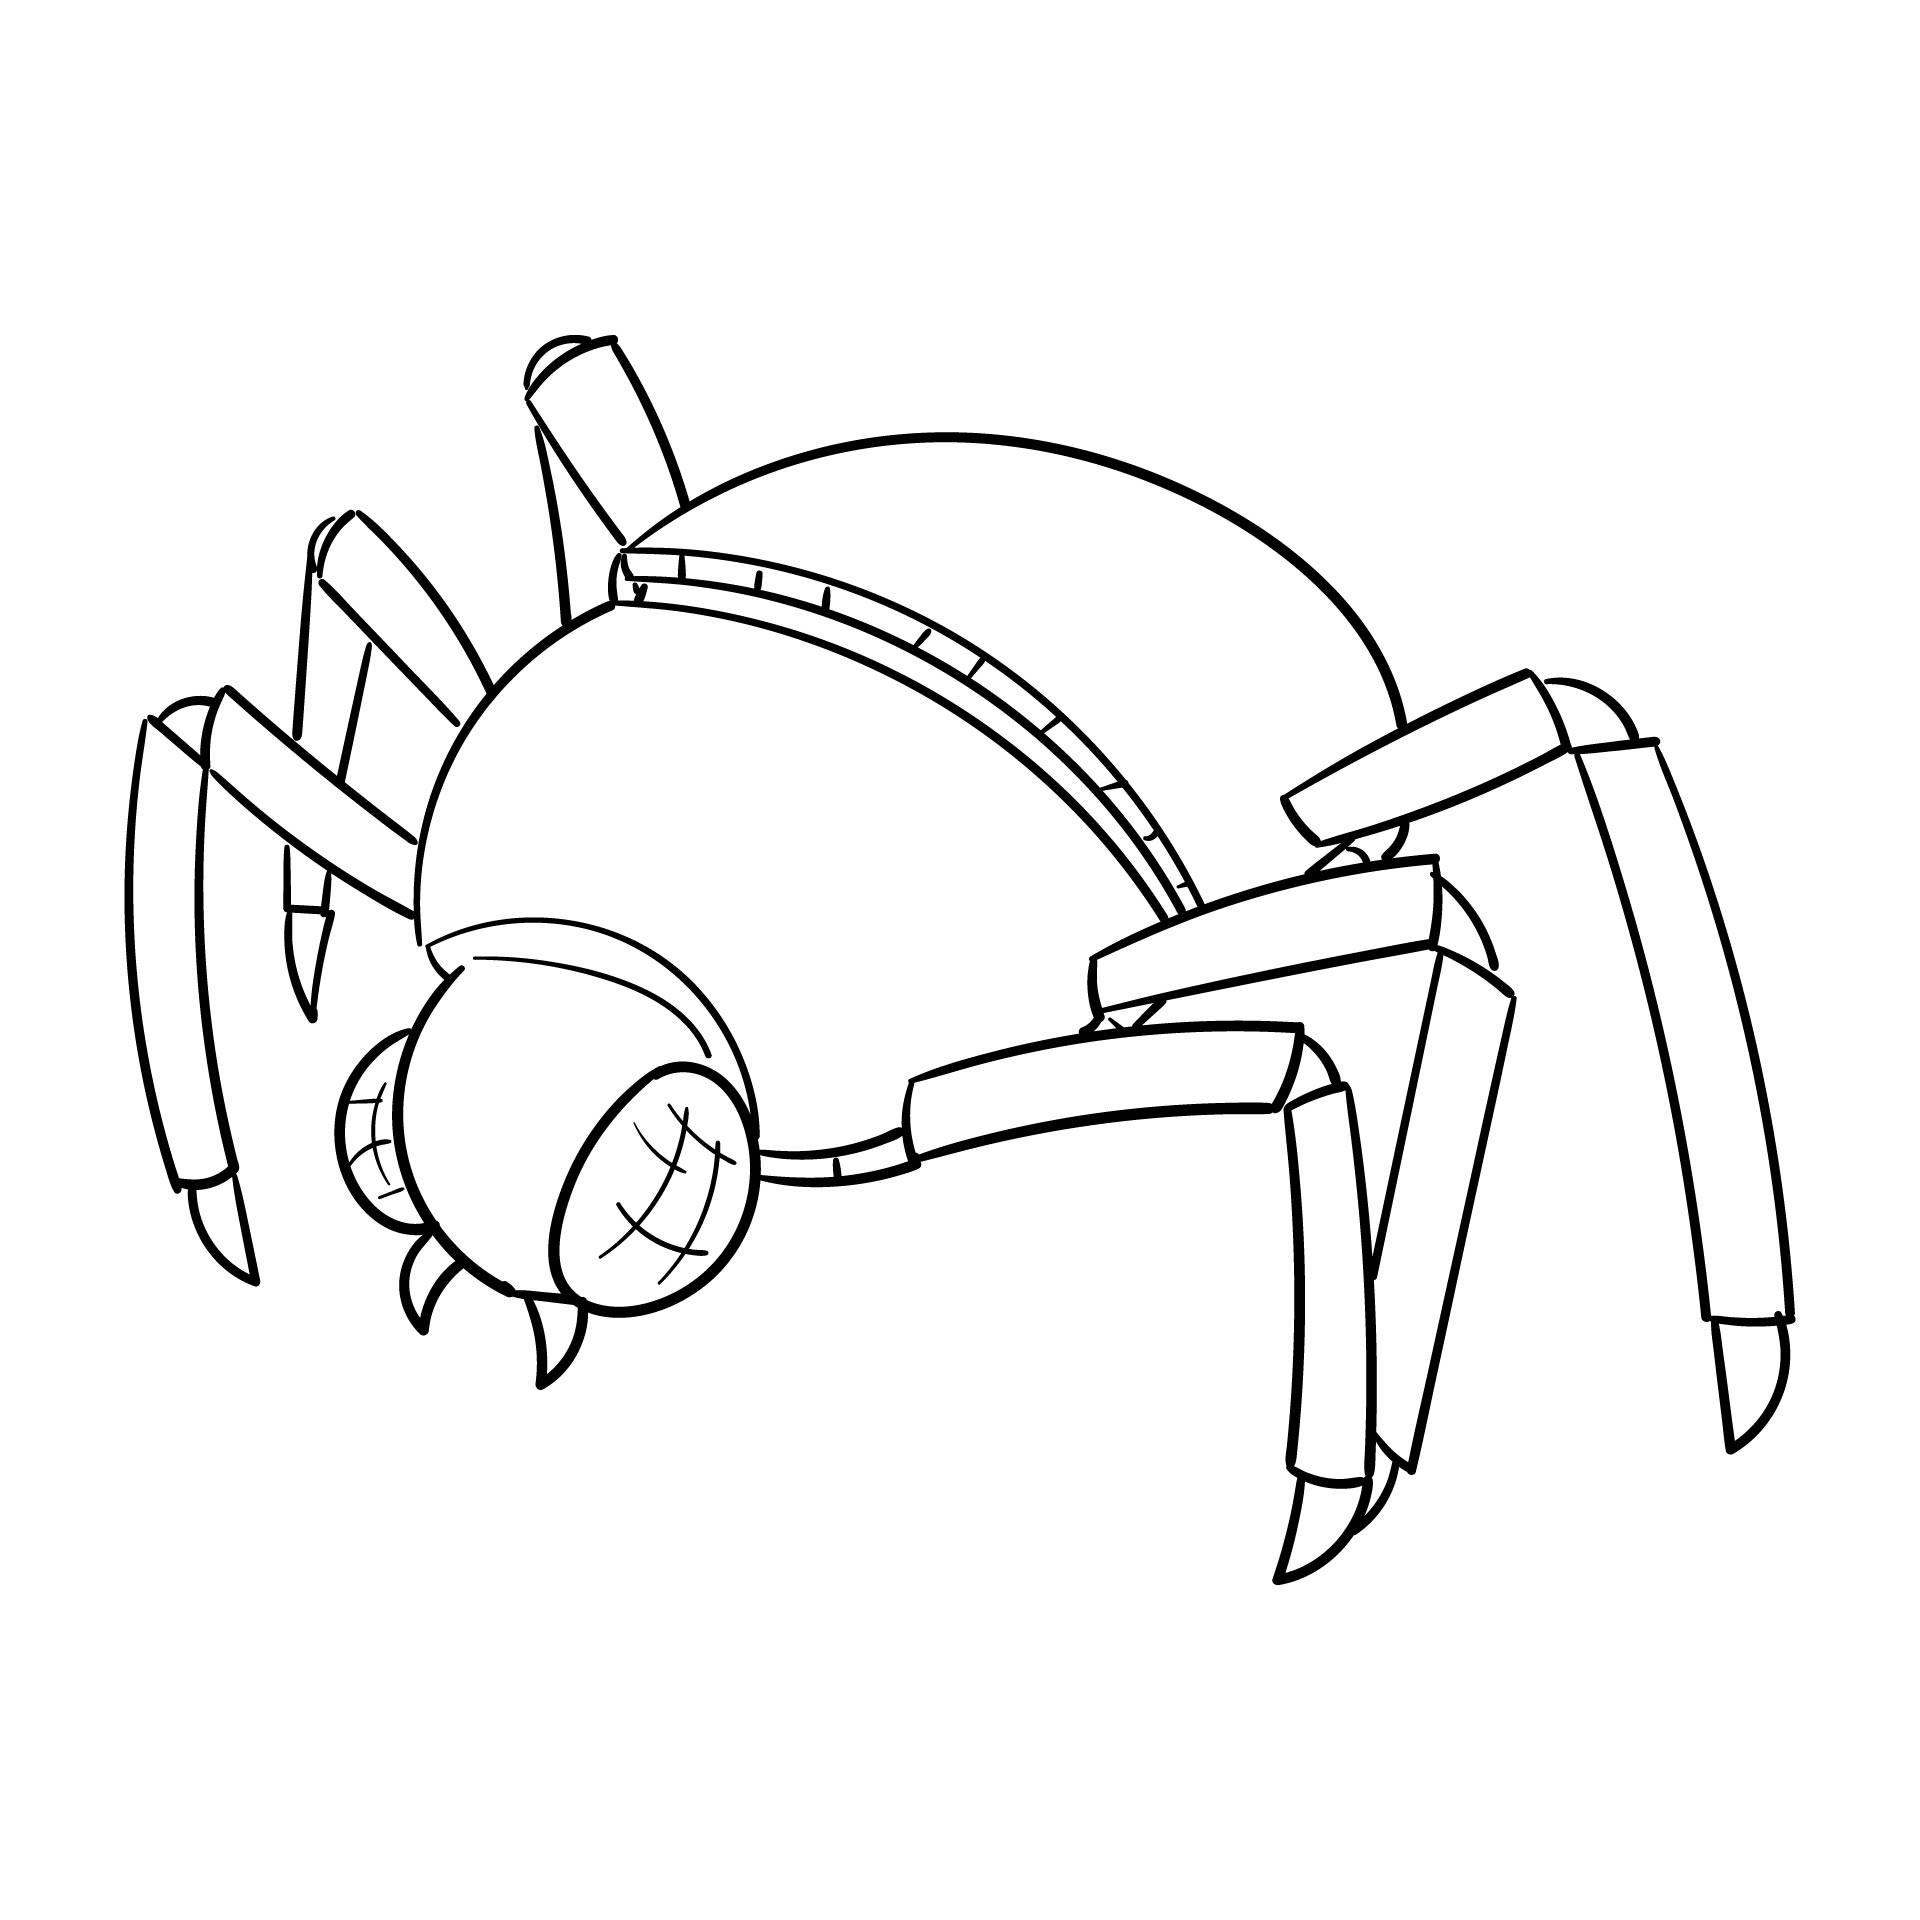 Free Printable Halloween Spider Coloring Pages To Print For Kids